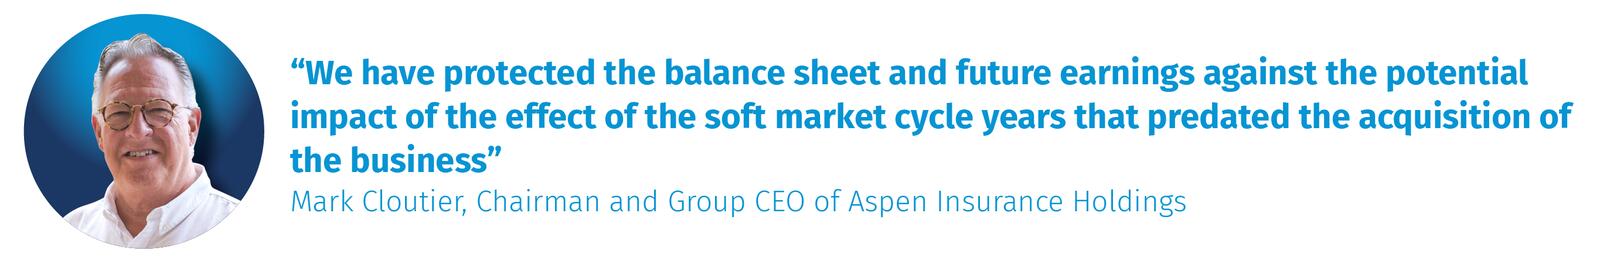 Mark Cloutier, Chairman and Group CEO of Aspen Insurance Holdings